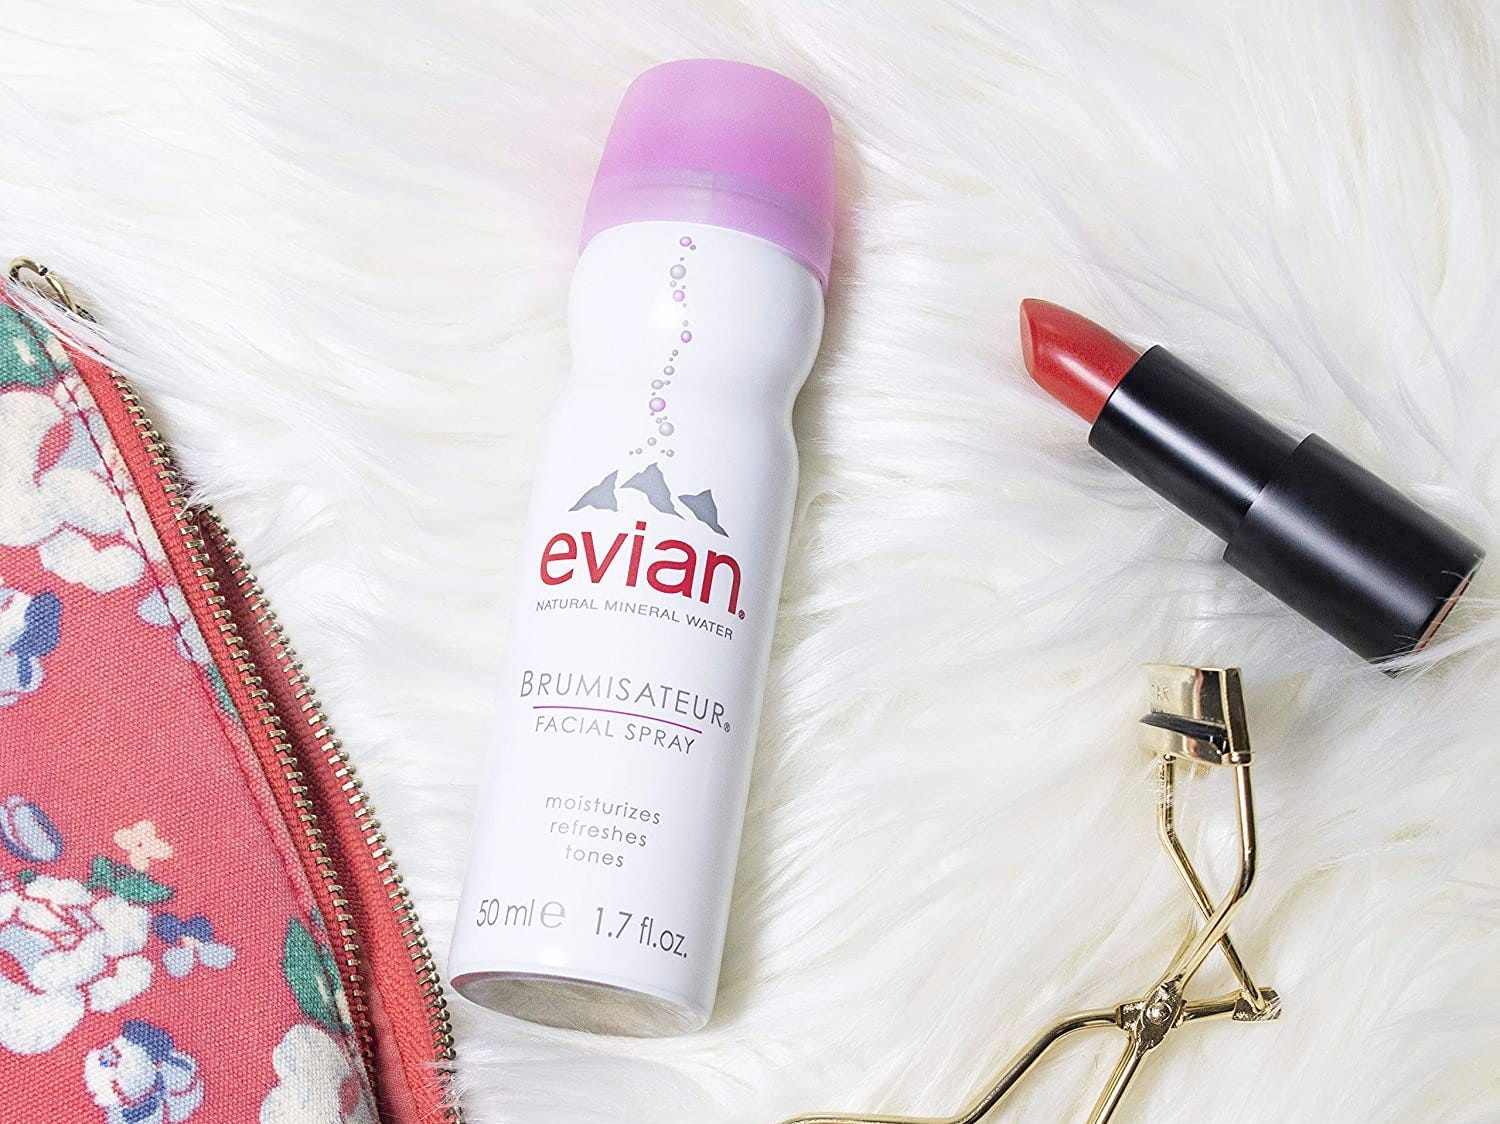 <p><strong>Evian Facial Spray</strong></p><div class="bi-product-card"><div class="product-card-options"><div class="product-card-option"><div class="product-card-button"><a href="https://affiliate.insider.com?u=https%3A%2F%2Fwww.amazon.com%2Fdp%2FB001PMIN10"><span>$17.00 FROM AMAZON</span></a></div></div></div></div><p>Face mists are an absolute essential for me when flying. A cool, refreshing spray makes me feel a hundred times better, even when I'm stuck on the crappiest seat on the crappiest plane. Evian's is scent-free, has a superfine mist, and is small and lightweight enough to fit in any bag. <em>—Sally Kaplan, executive editor</em></p>